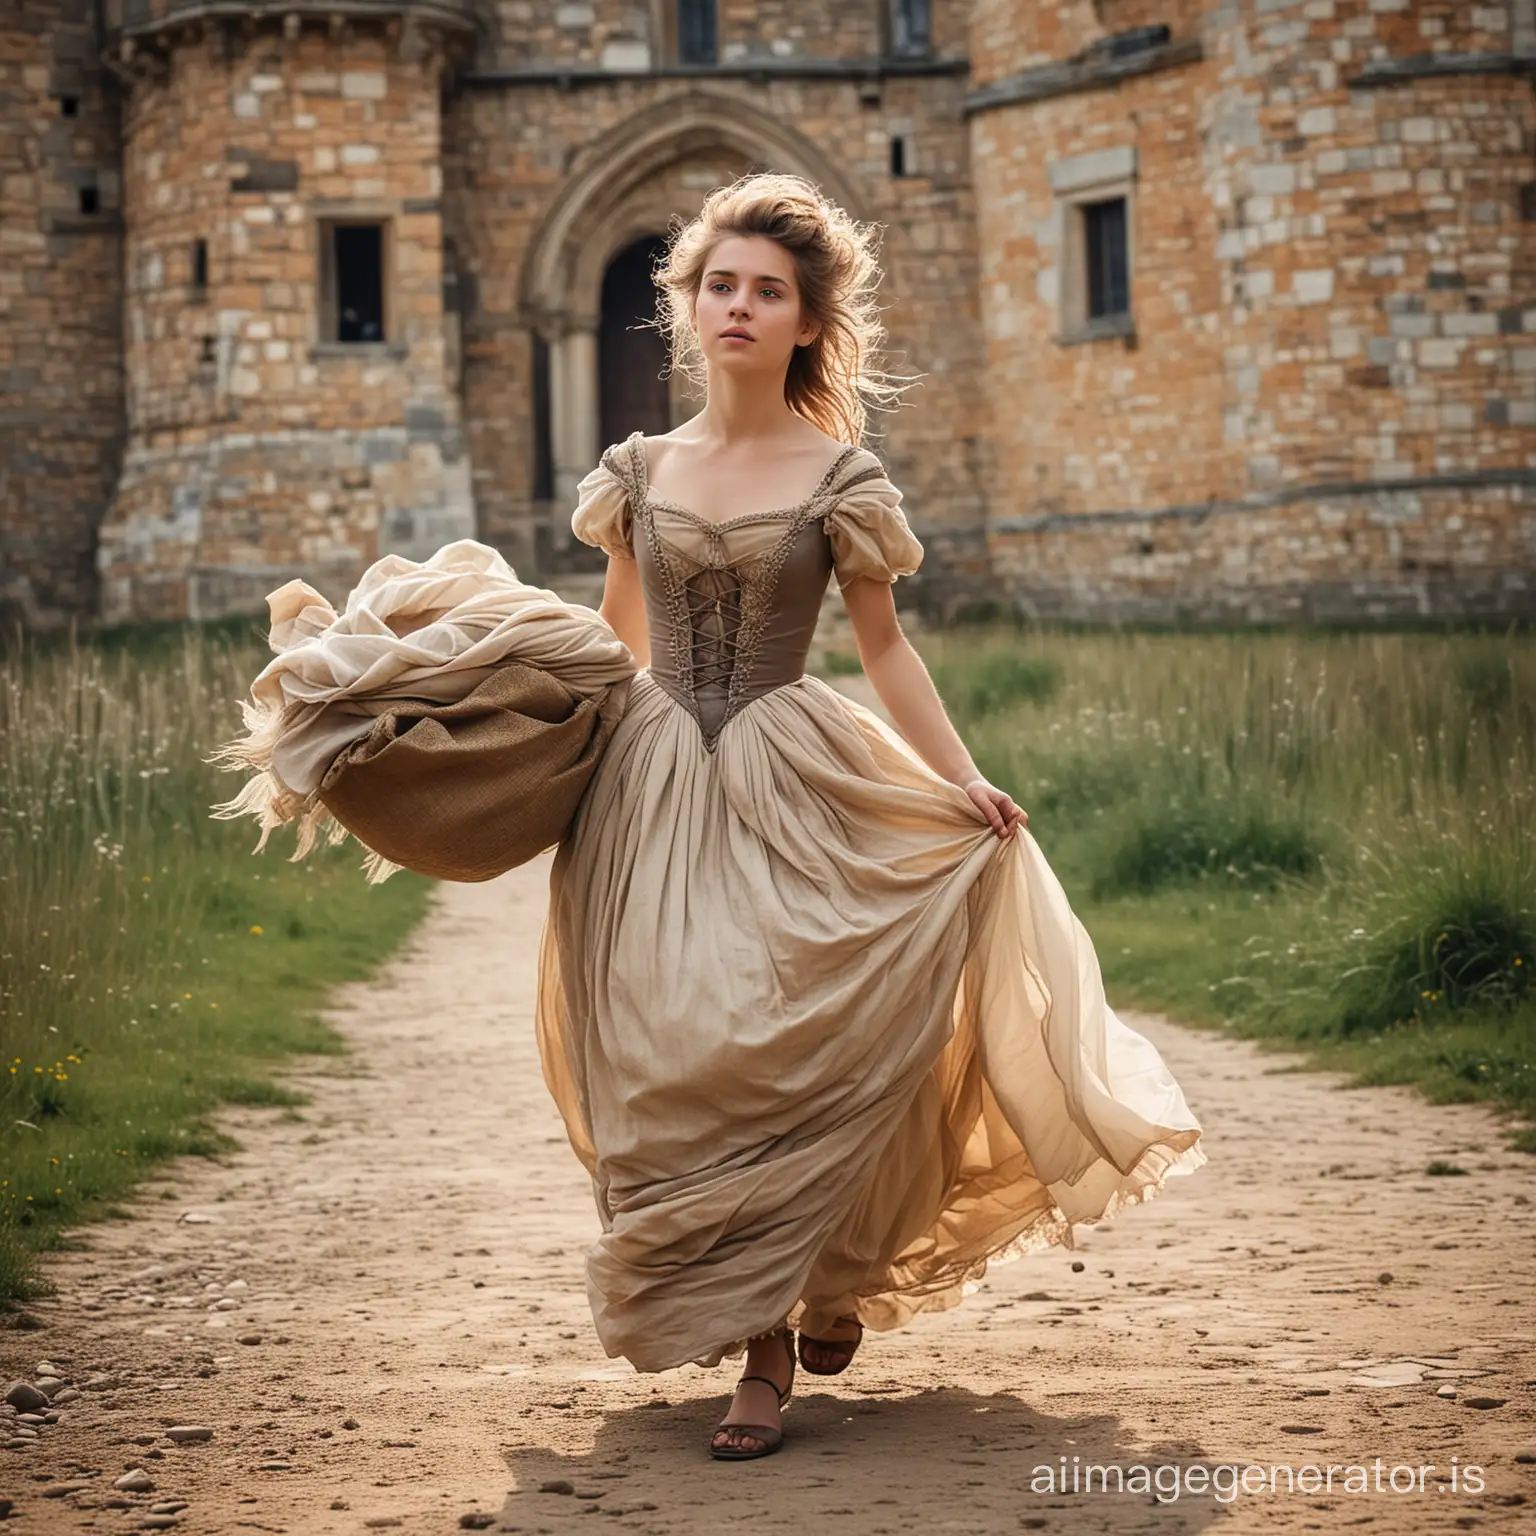 Youthful-BallgownClad-Princess-with-Disheveled-Hair-Escaping-a-19th-Century-European-Castle